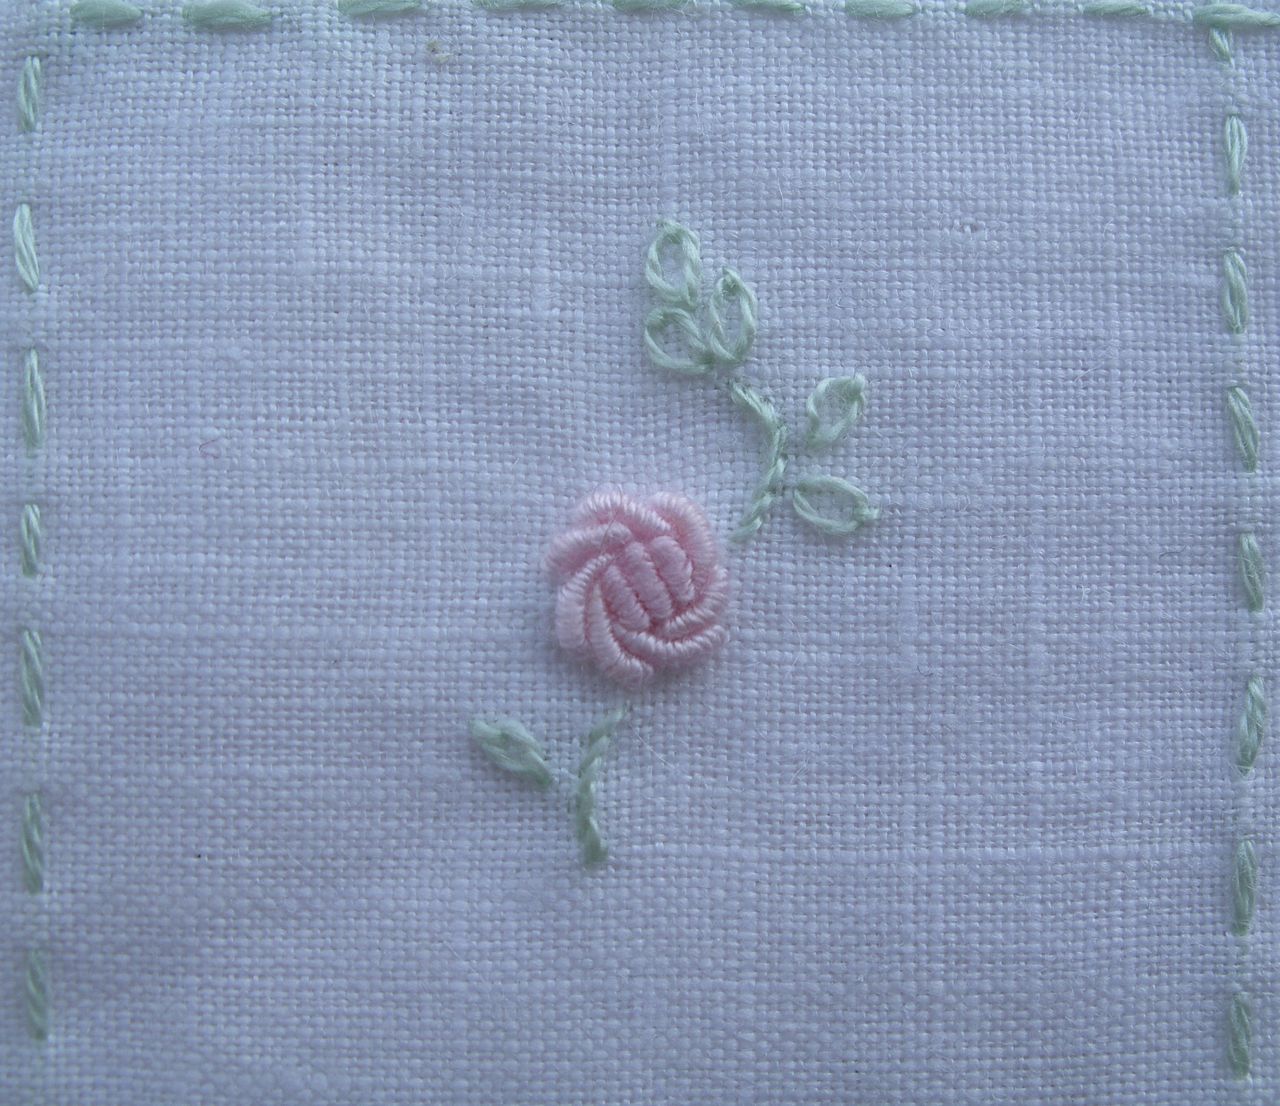 Free Embroidery Lessons - Embroidery Stitches